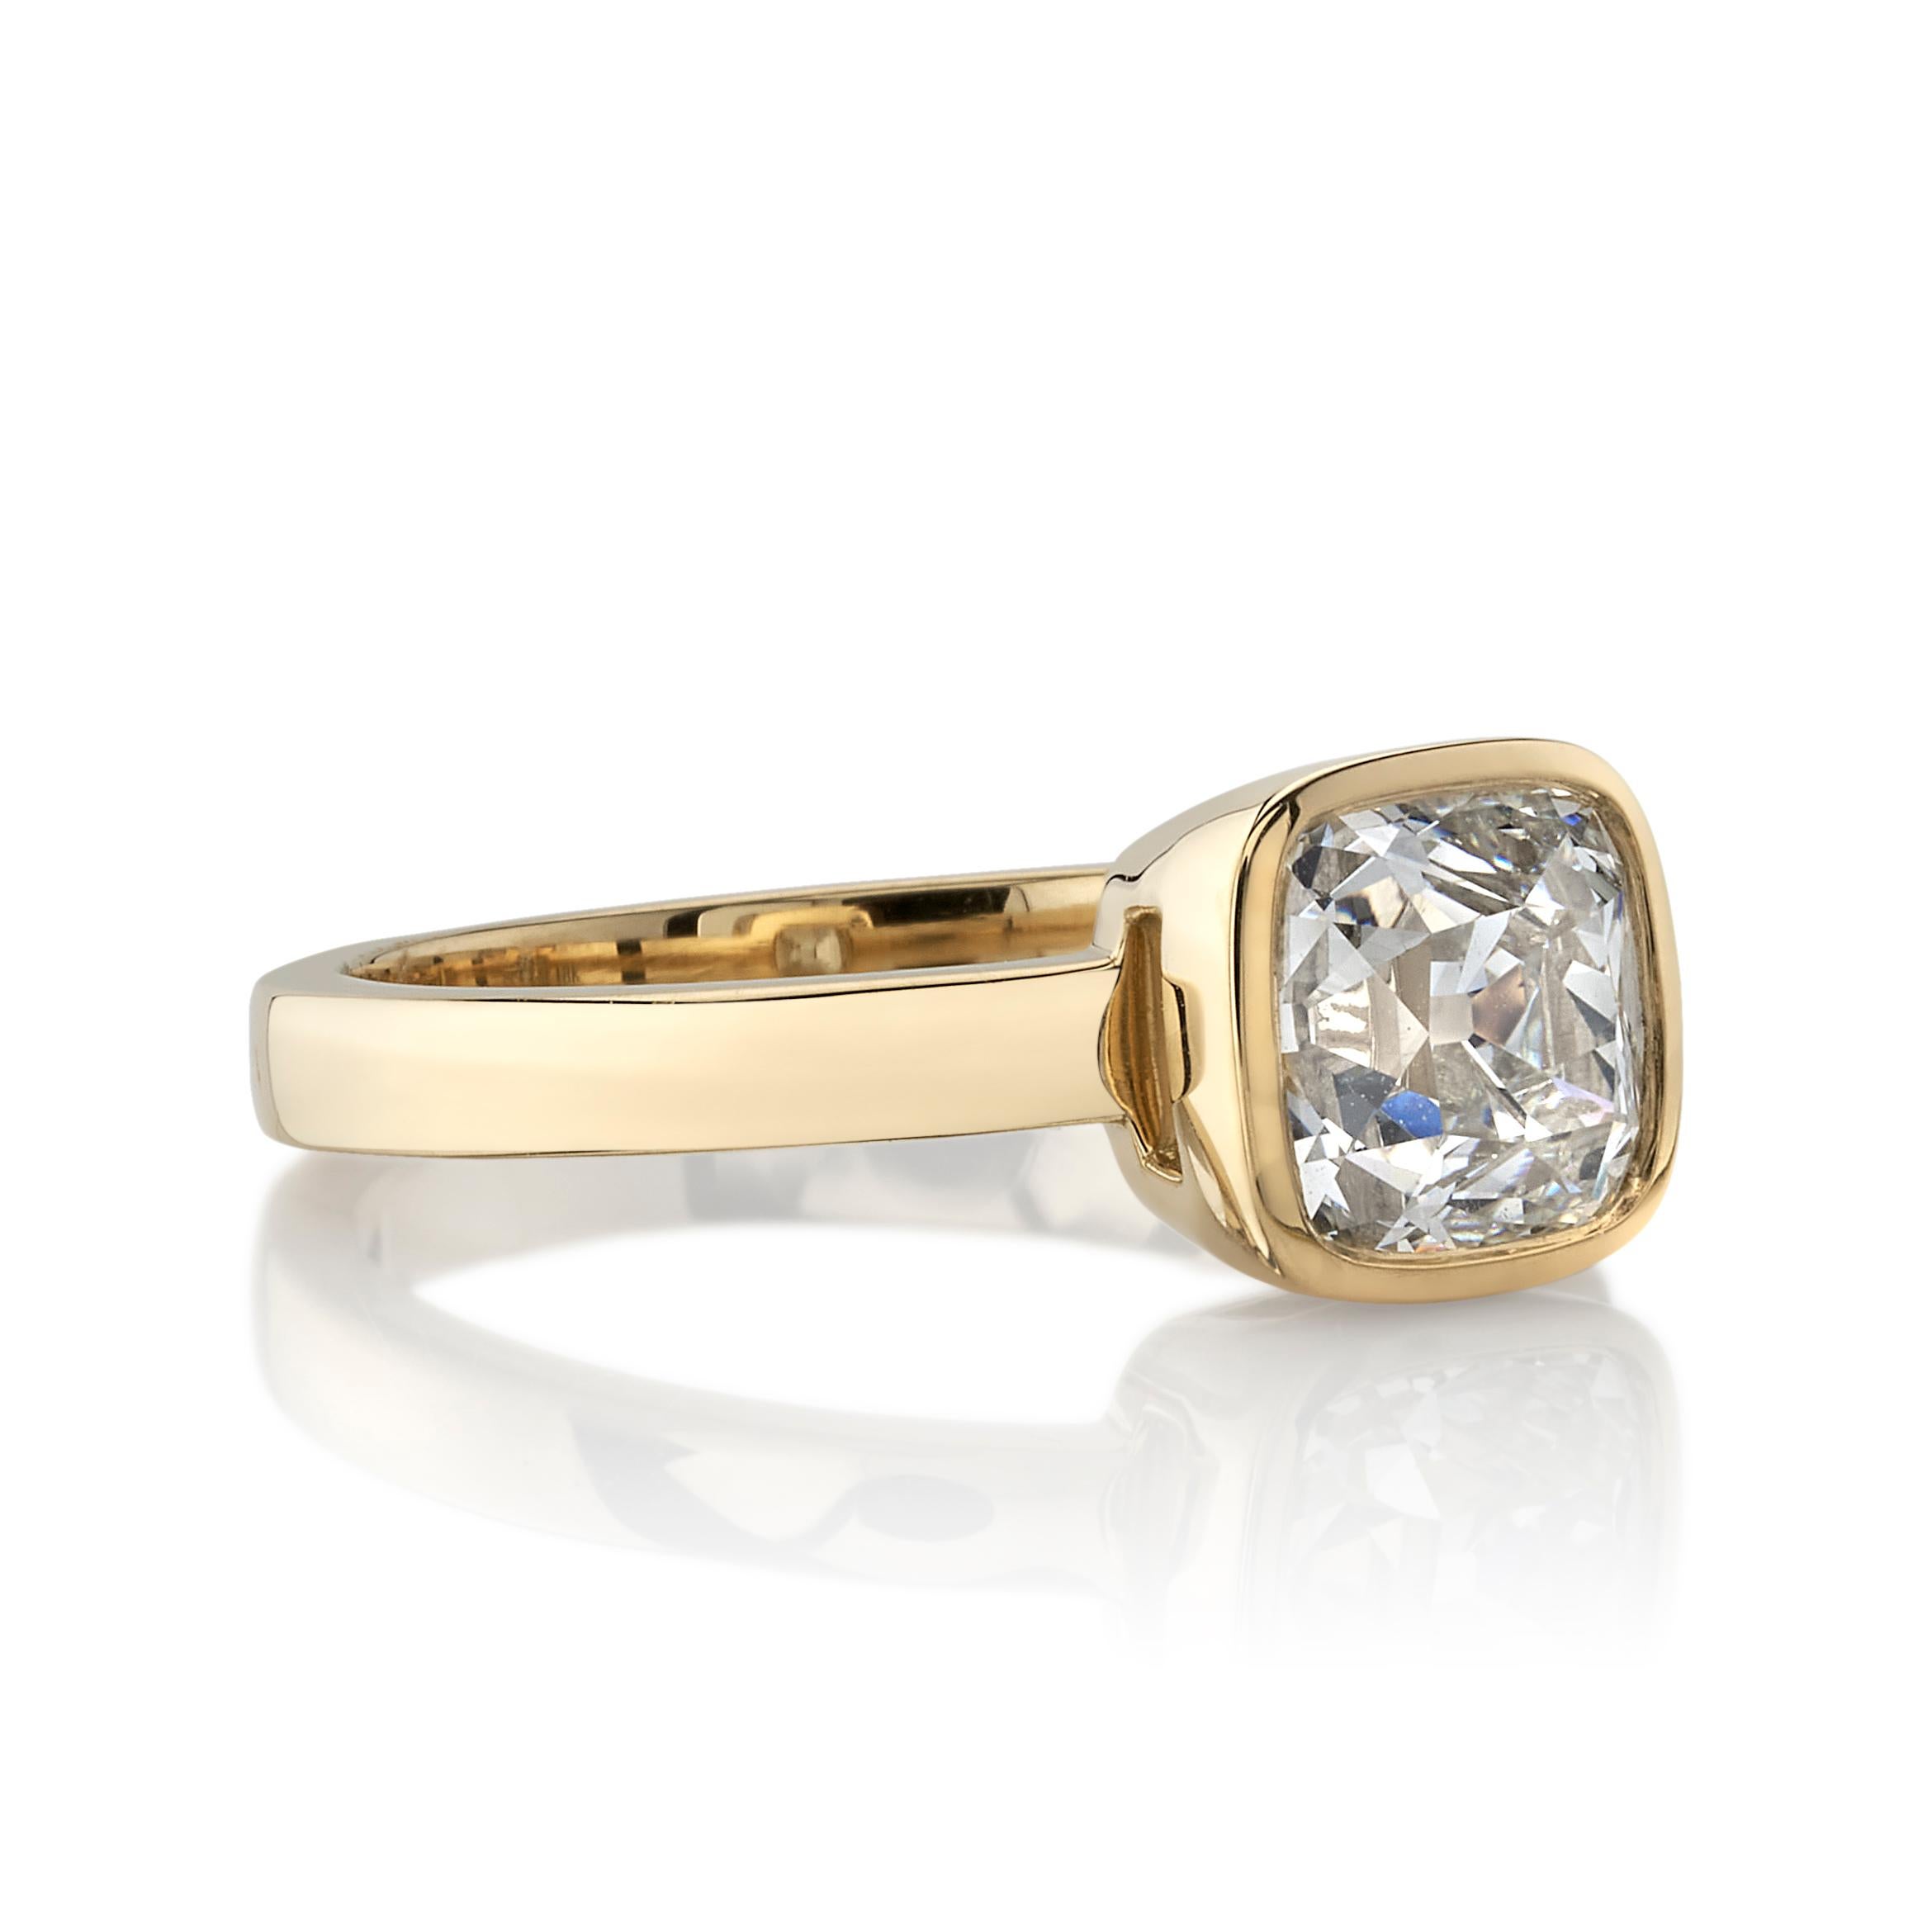 1.64ctw I/VS1 GIA certified antique cushion cut diamond set in a handcrafted 18K yellow gold mounting.

